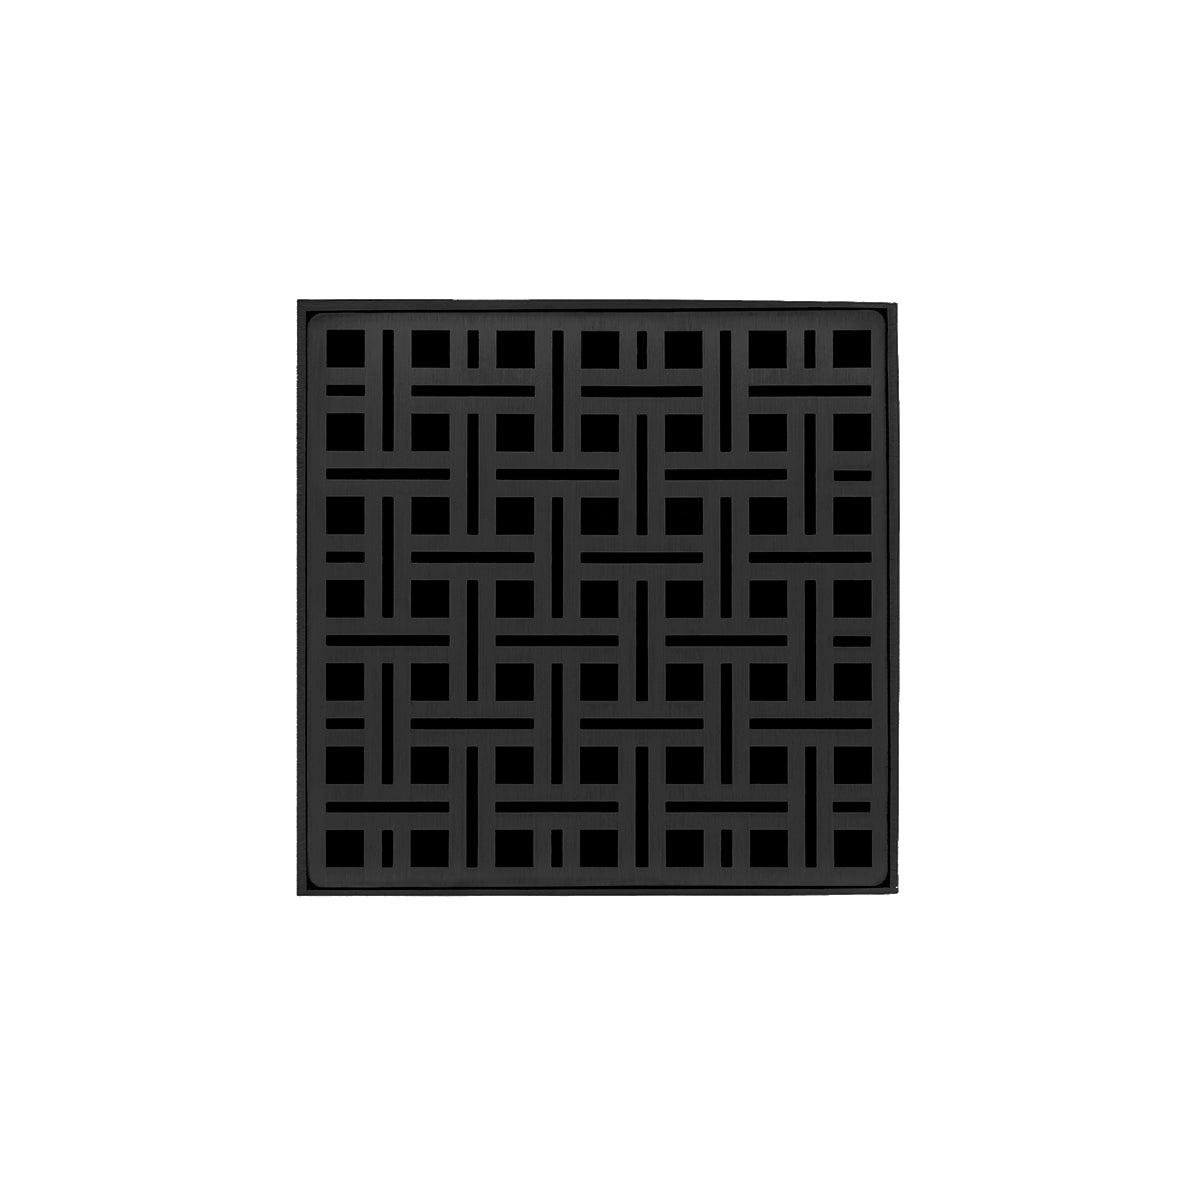 Infinity Drain 5" x 5" VD 5 Premium Center Drain Kit with Weave Pattern Decorative Plate with Cast Iron Drain Body for Hot Mop, 2" Outlet